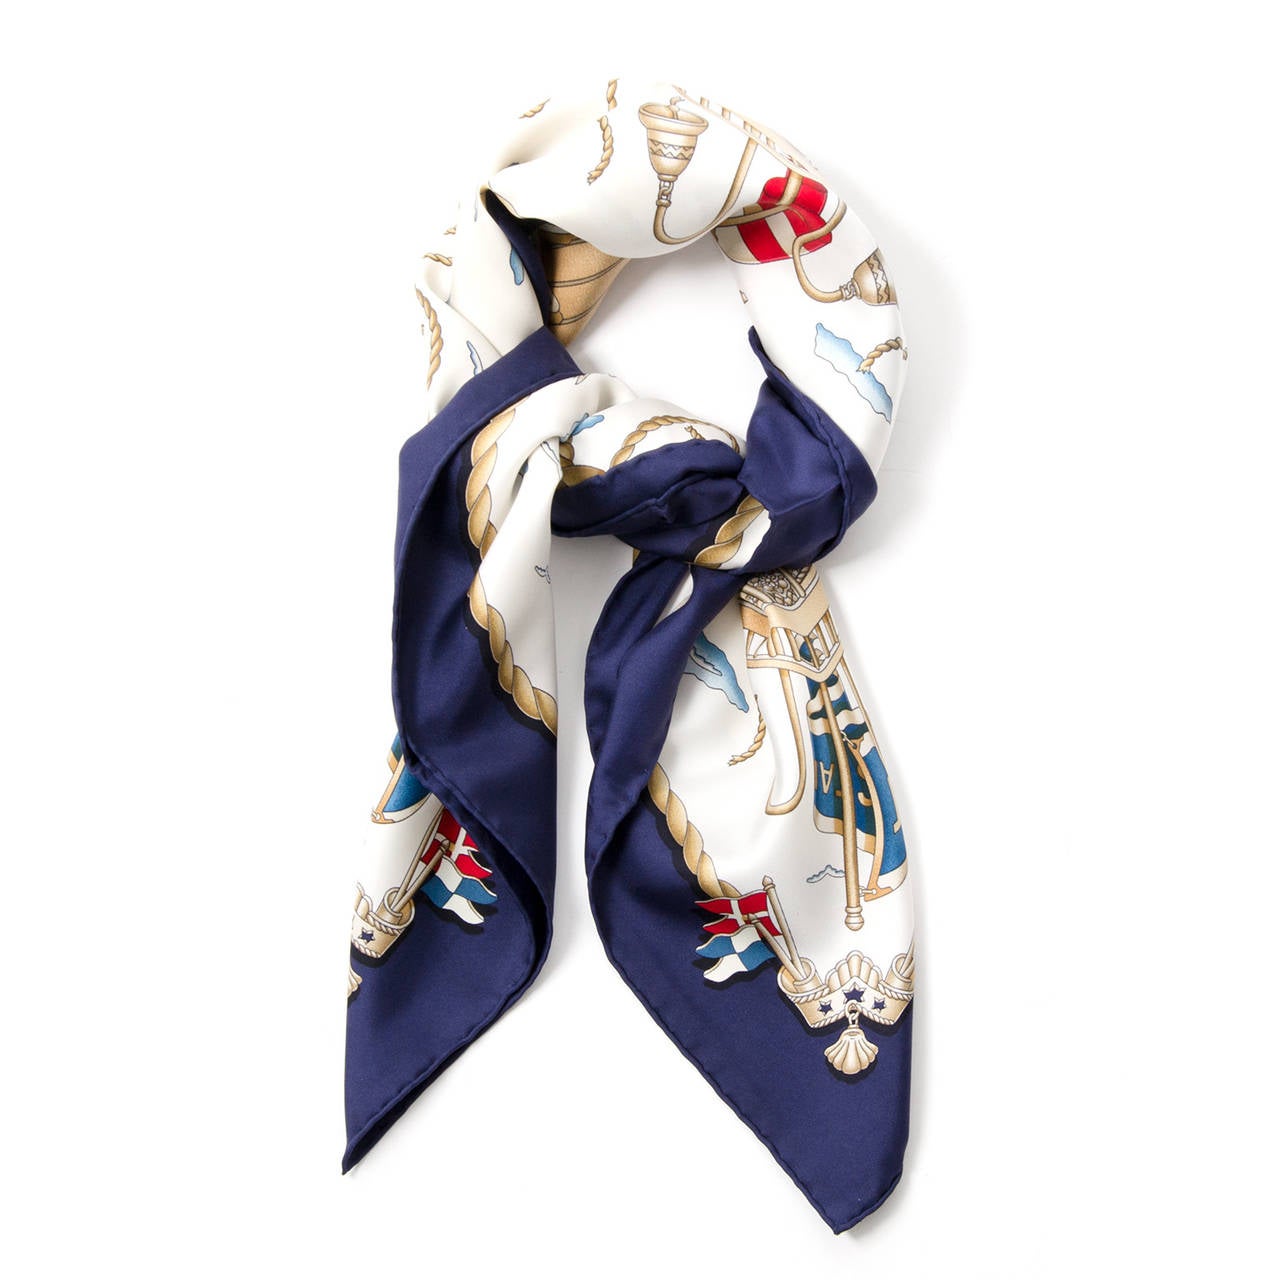 The well-known Hermès scarf or 